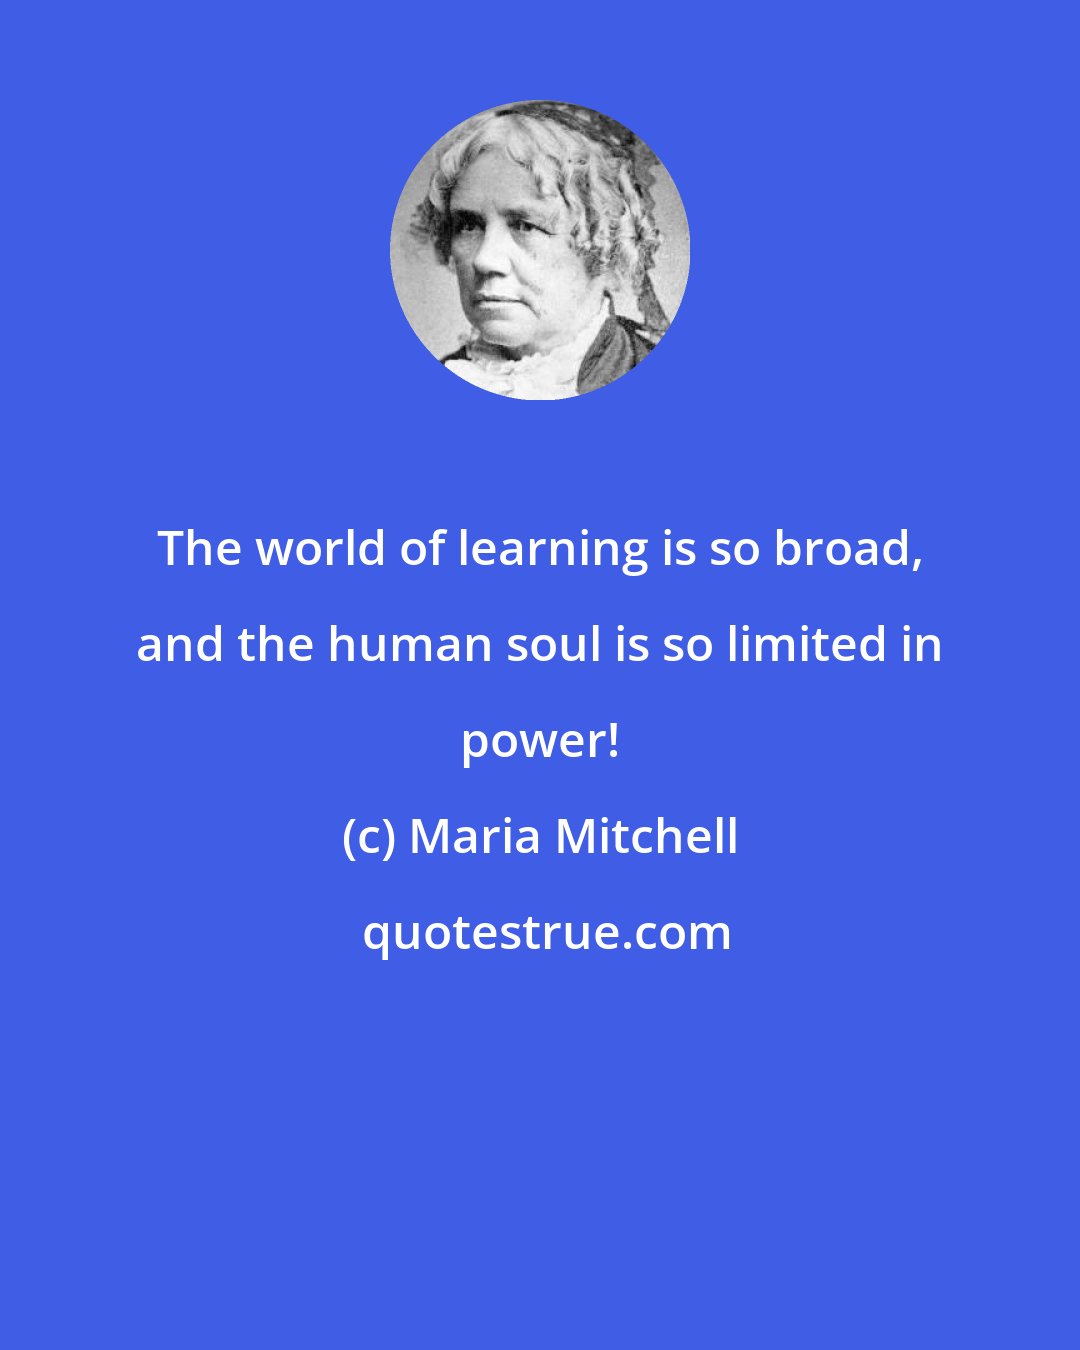 Maria Mitchell: The world of learning is so broad, and the human soul is so limited in power!